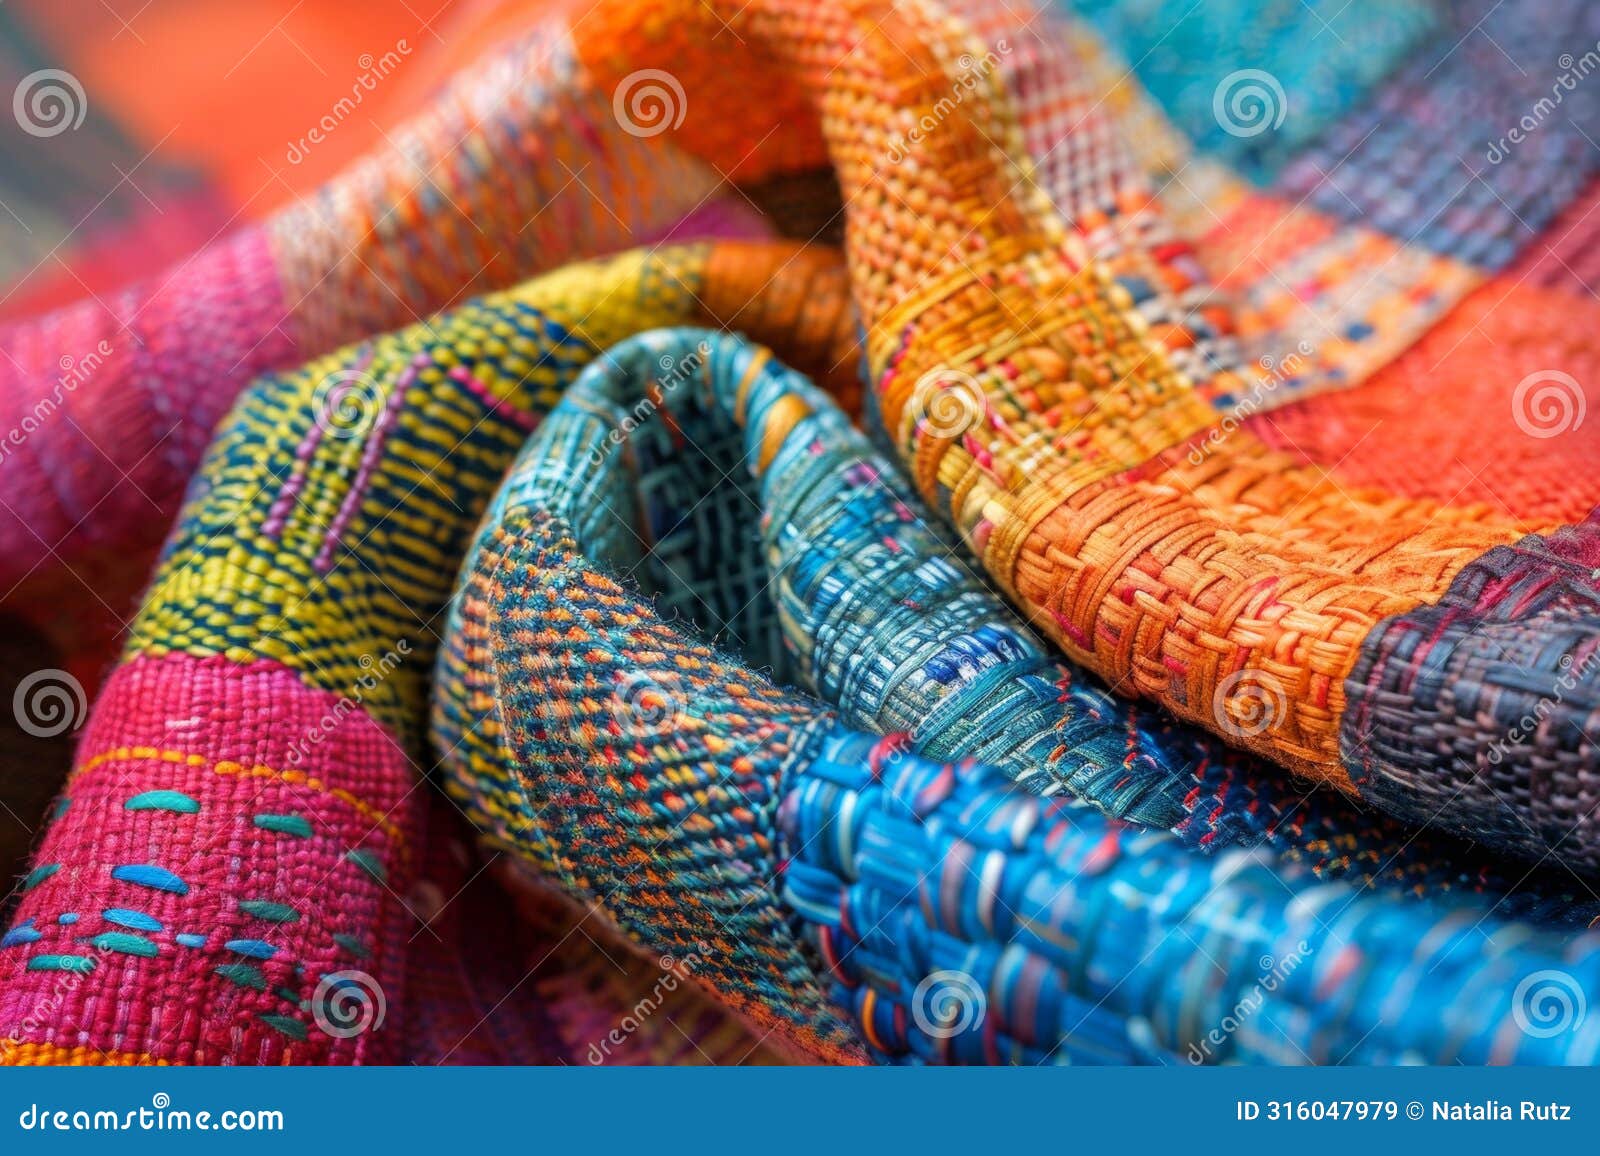 richly textured and colorful handwoven textiles